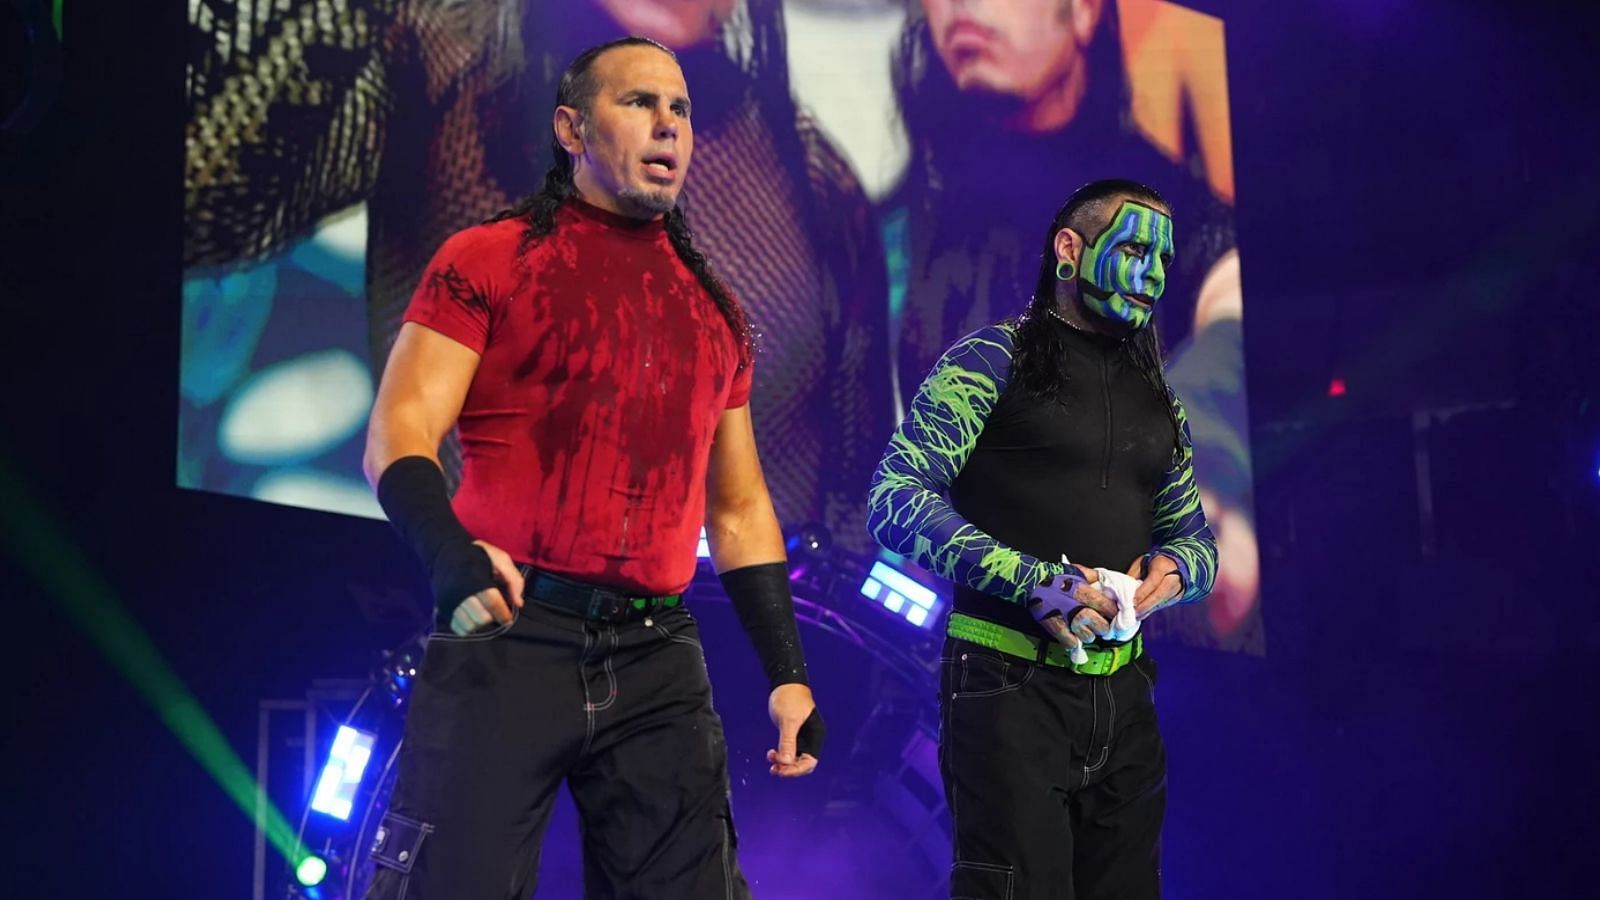 Could The Hardys make history next week?